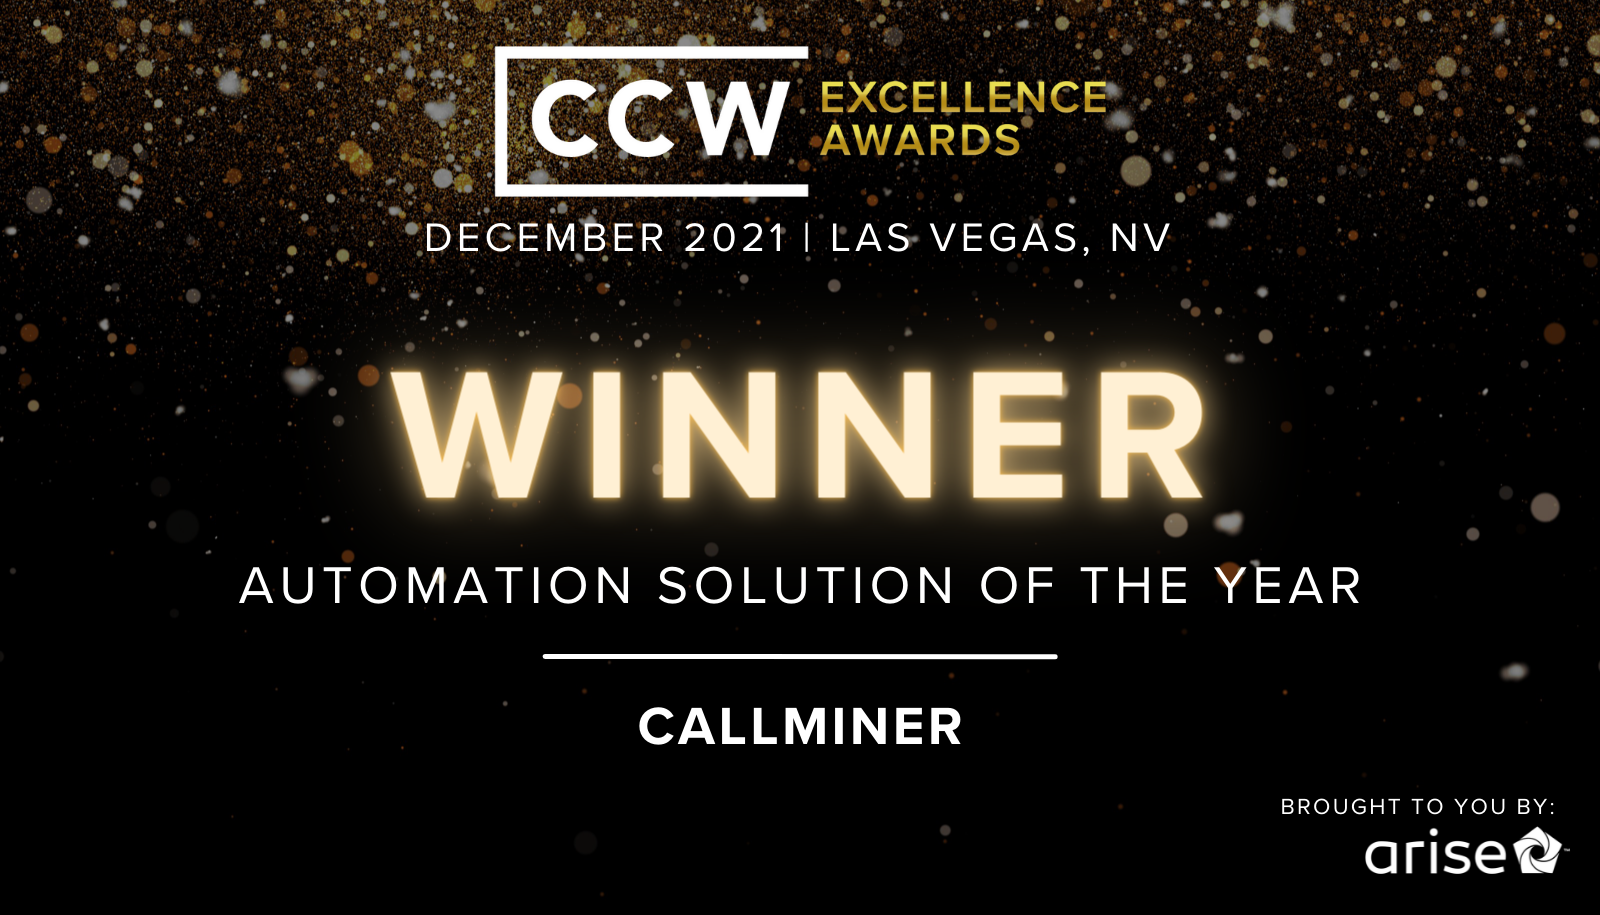 CCW Excellence Awards 2021